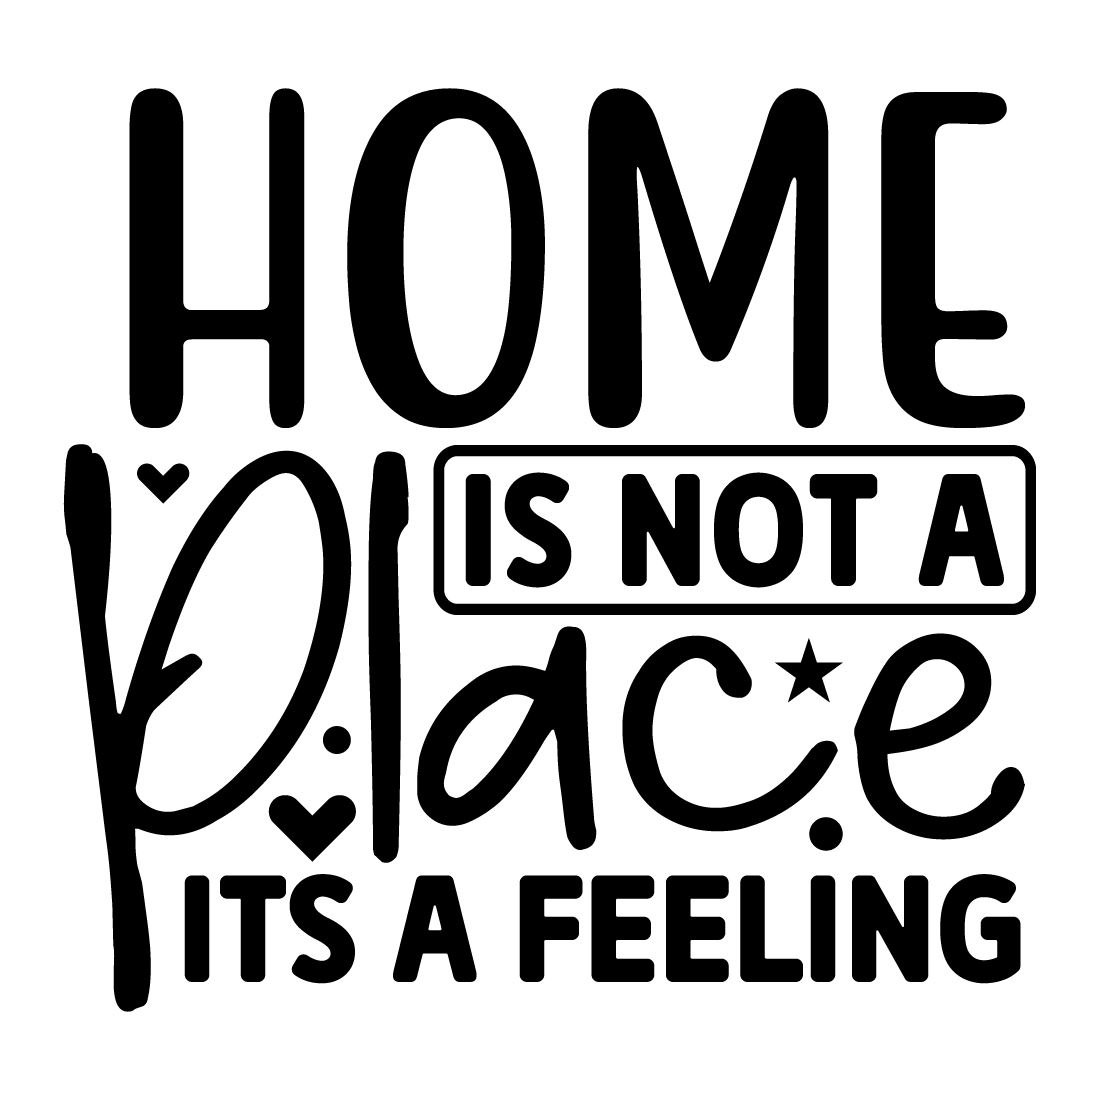 Home is not a place its a feeling preview image.